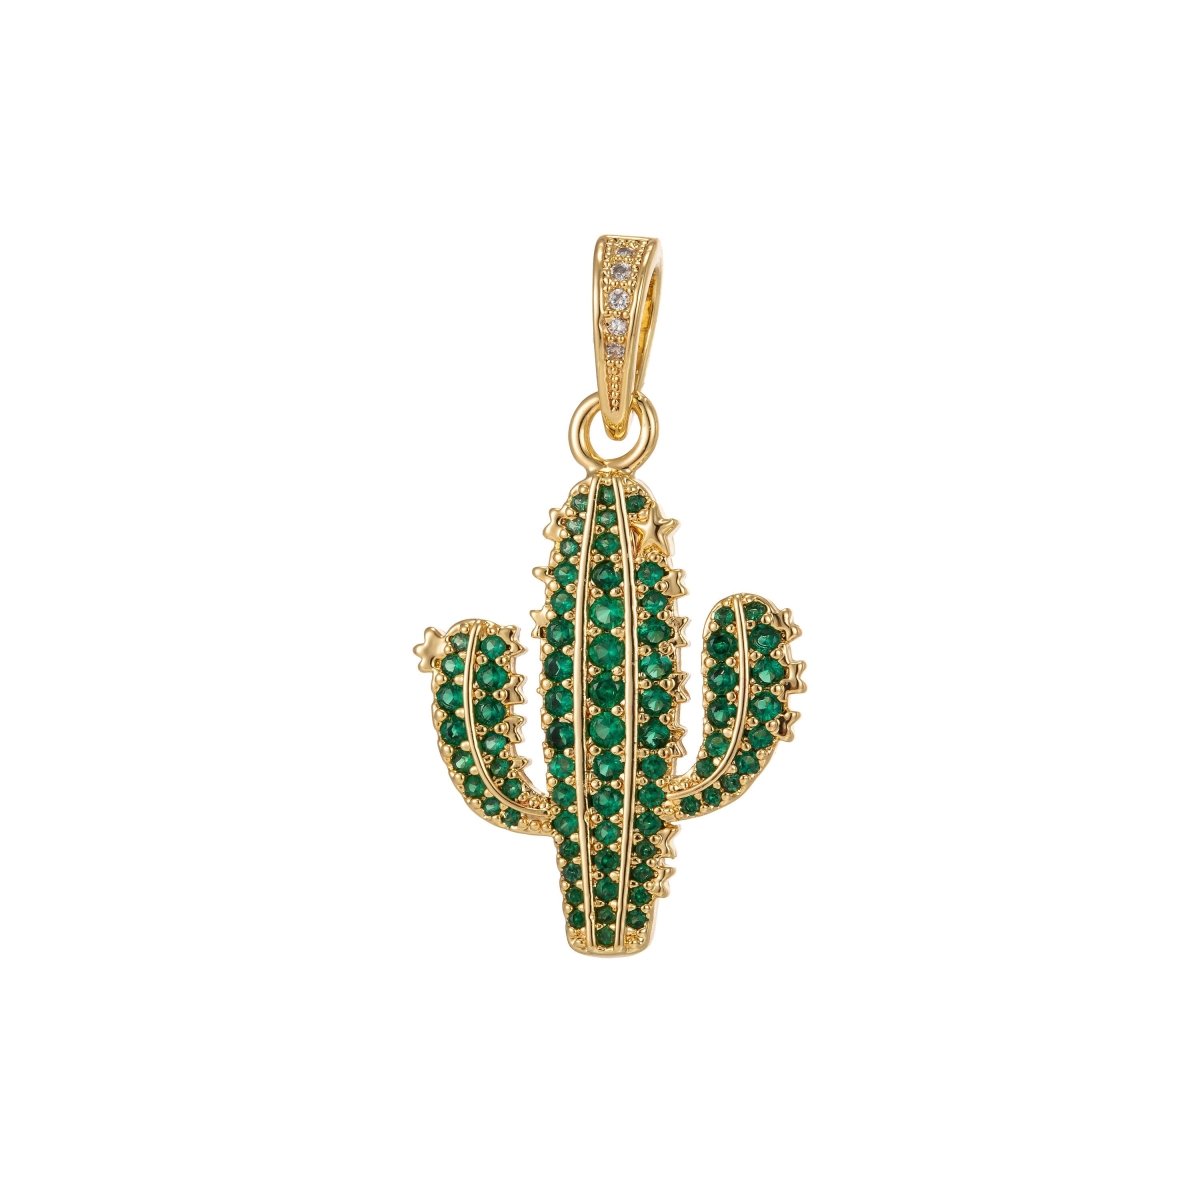 Dainty Green Cactus Charm Saguaro Pendant Gold Filled Charm for Teen Jewelry Micro Pave charm Necklace Earring Bracelet Charm Supply I-187 - DLUXCA